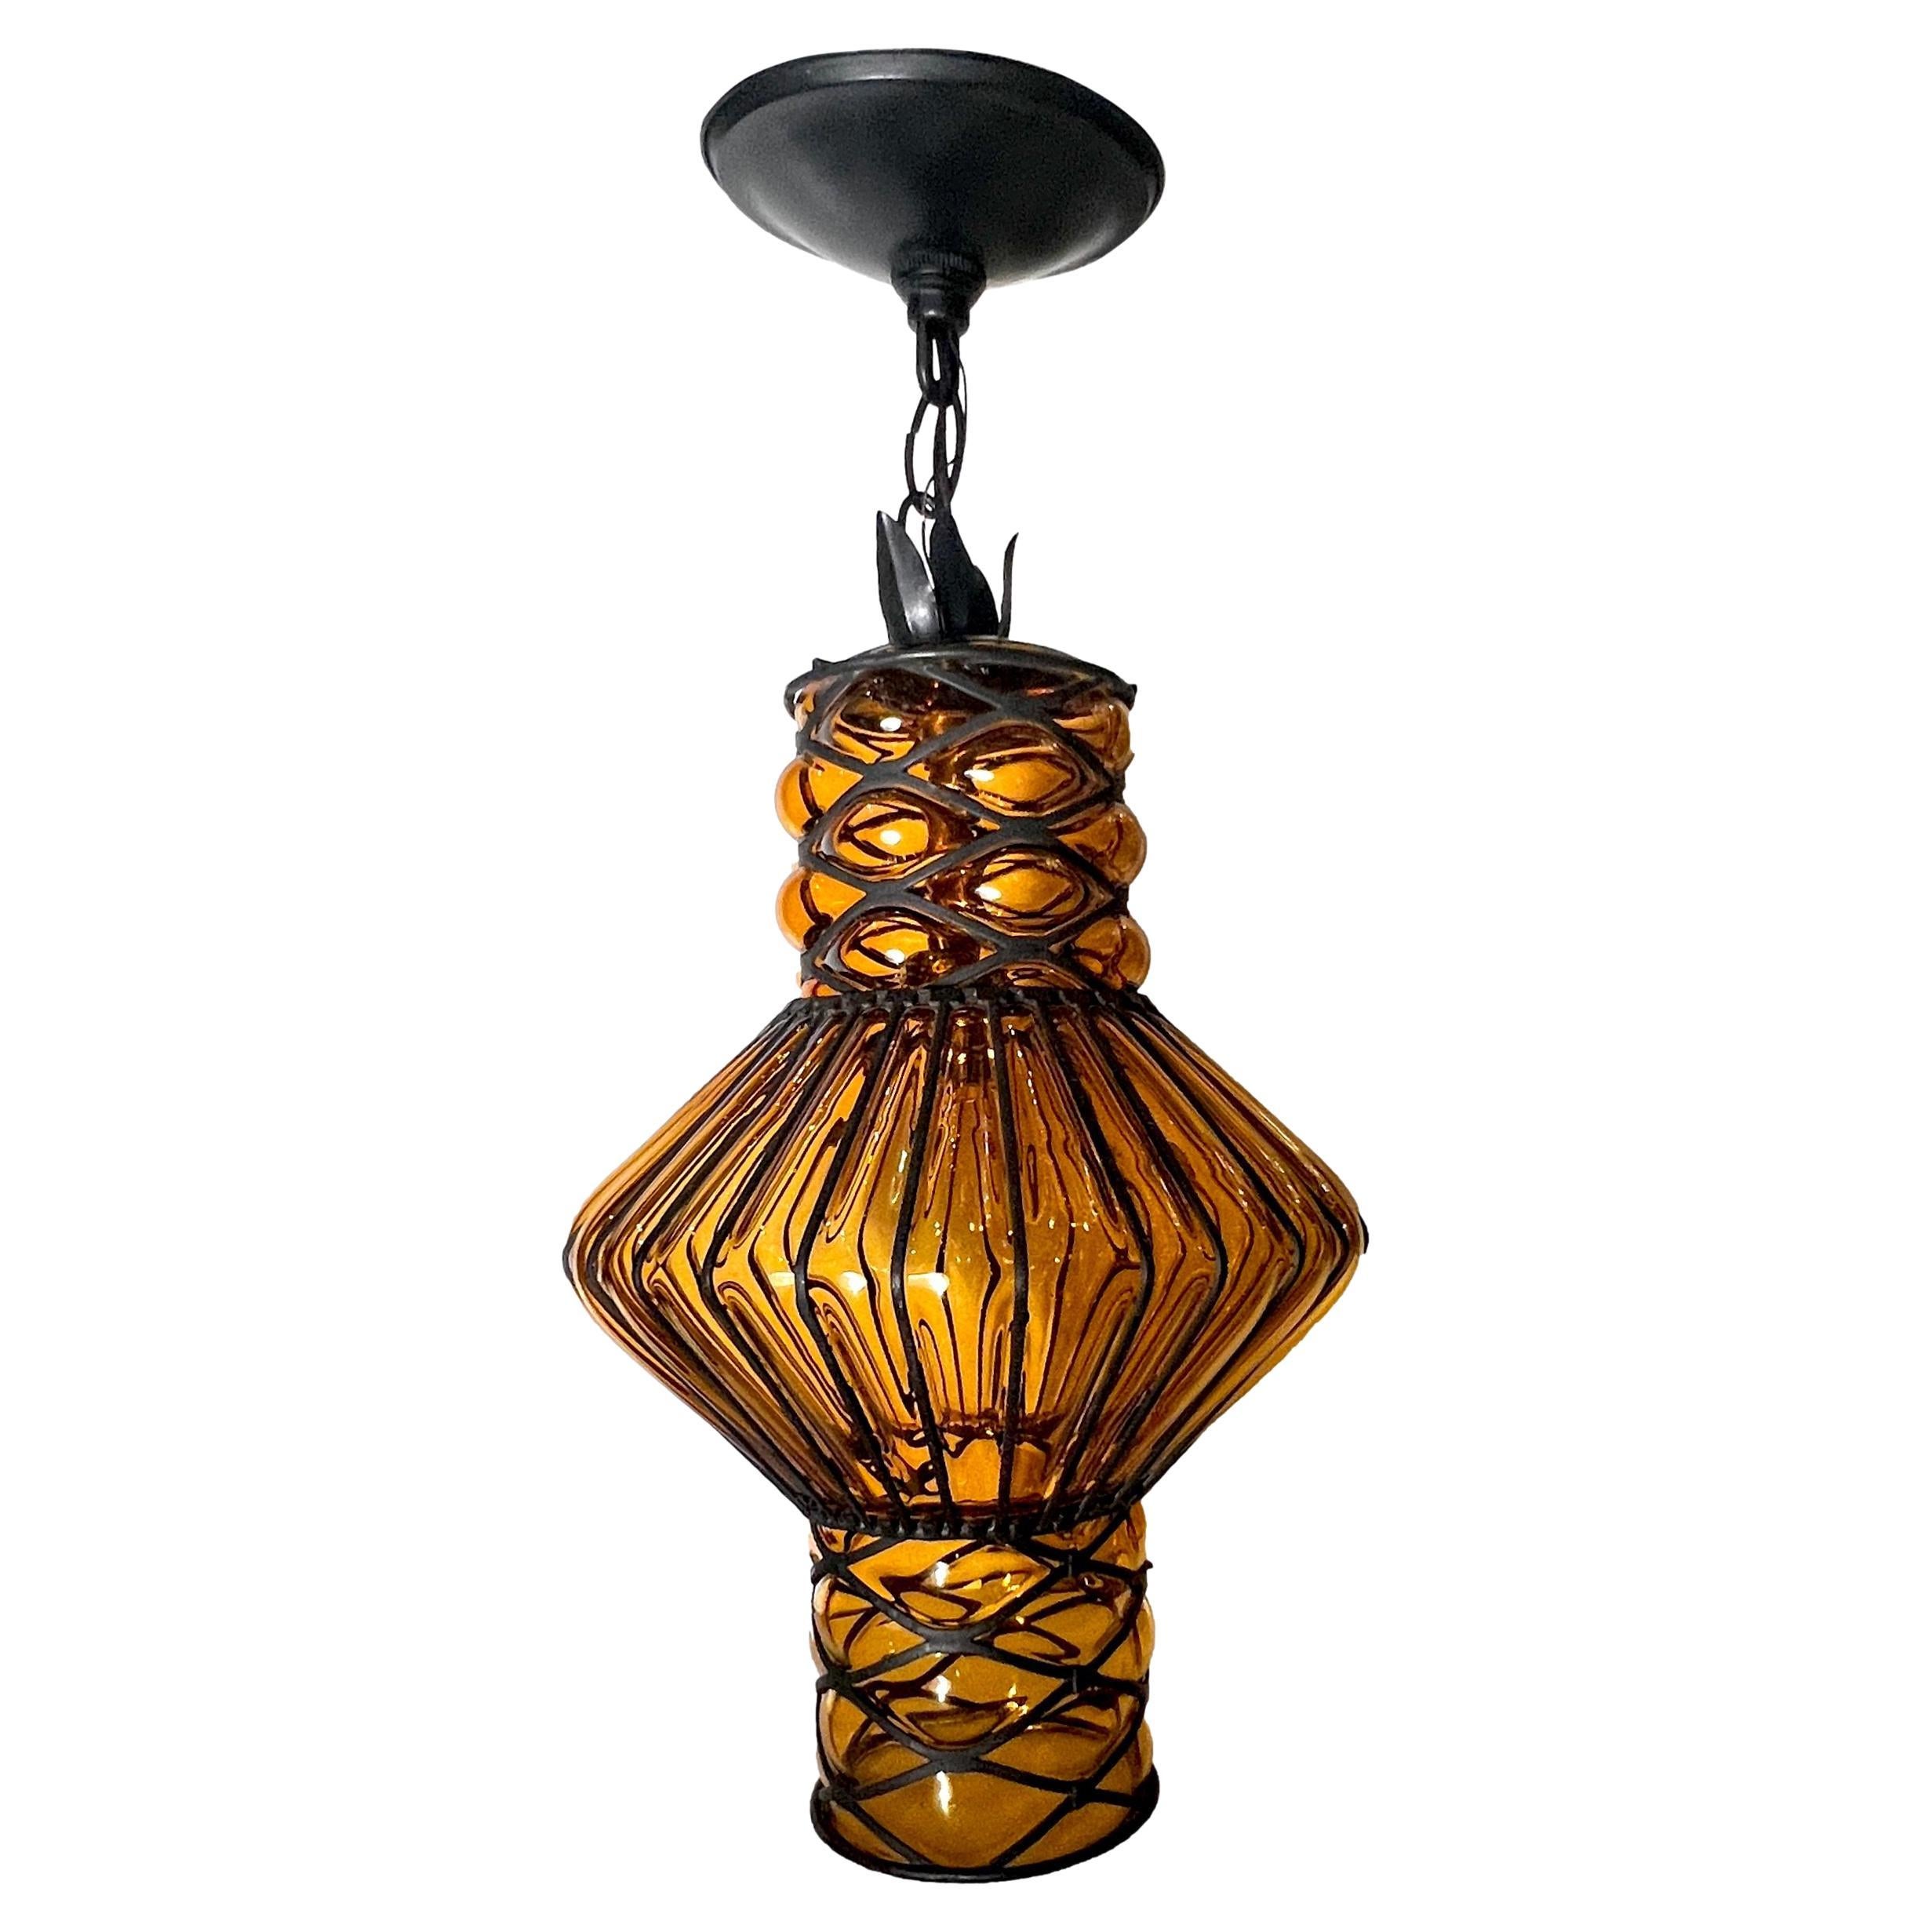 An Italian circa 1950's blown glass and iron lantern with interior light. 

Measurements:
Current drop: 21